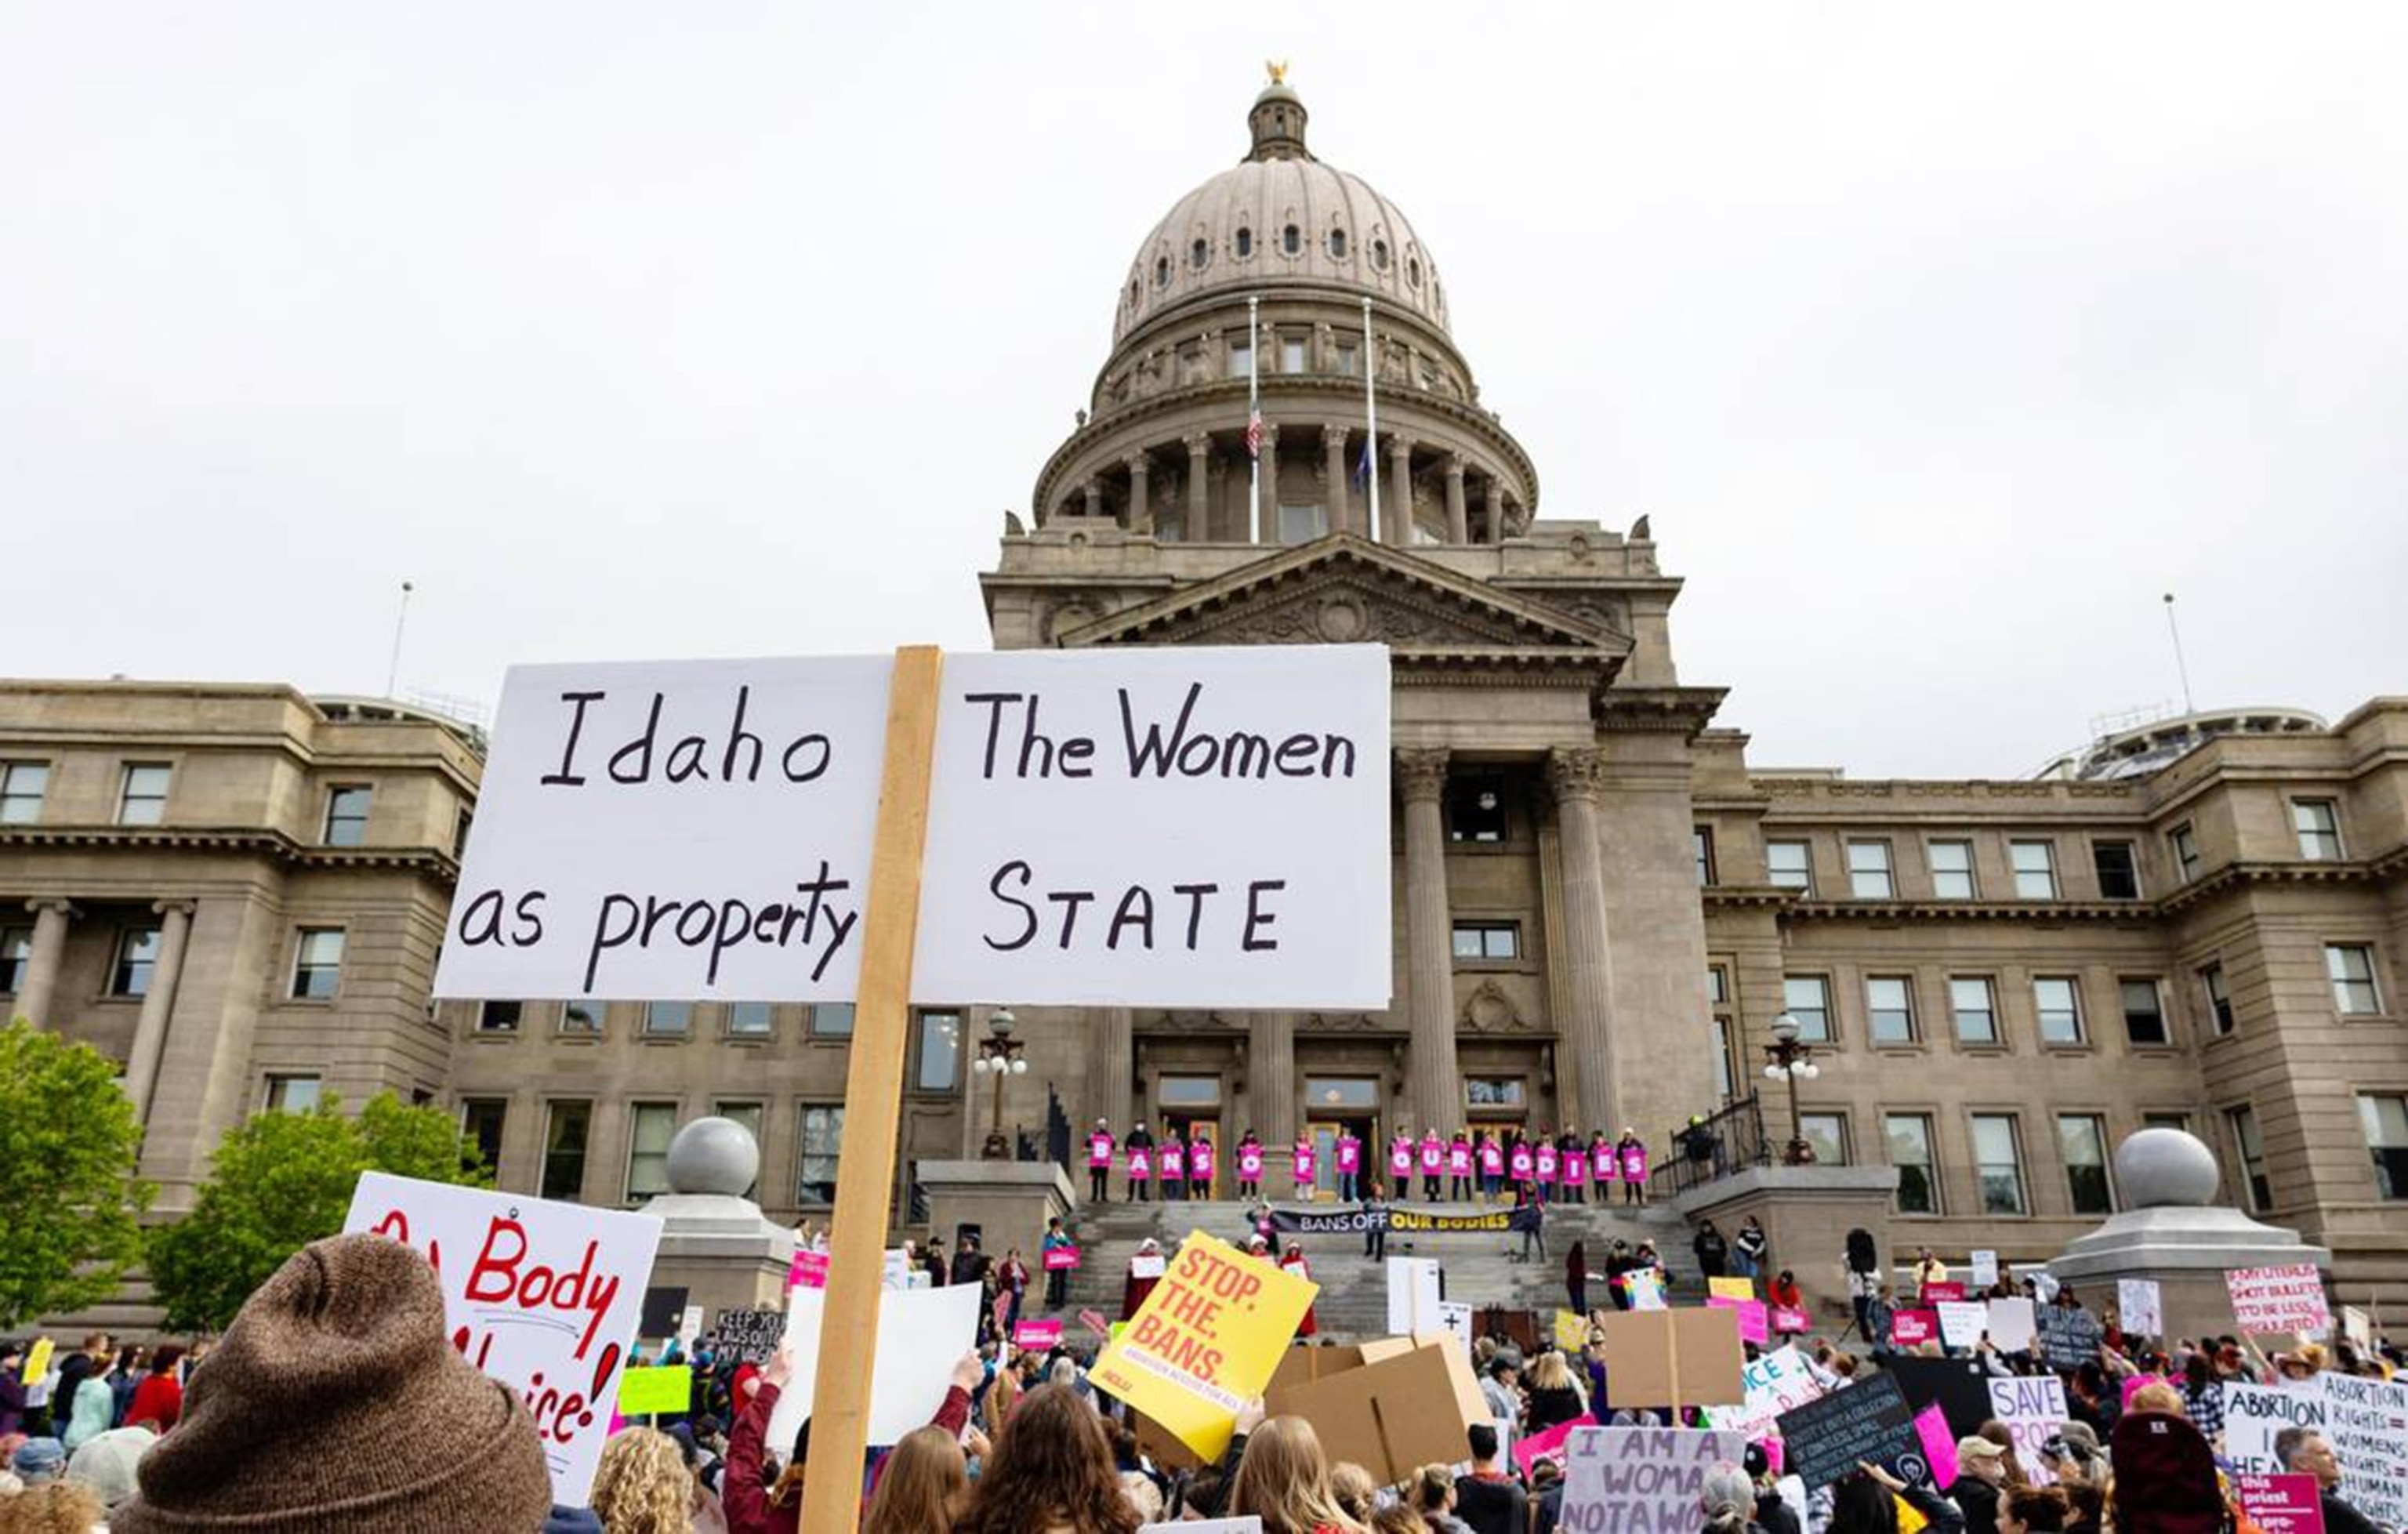 PHOTO: Protesters at Planned Parenthood's Bans Off Our Bodies rally gather outside of the Idaho Statehouse in Boise, May 14, 2022.